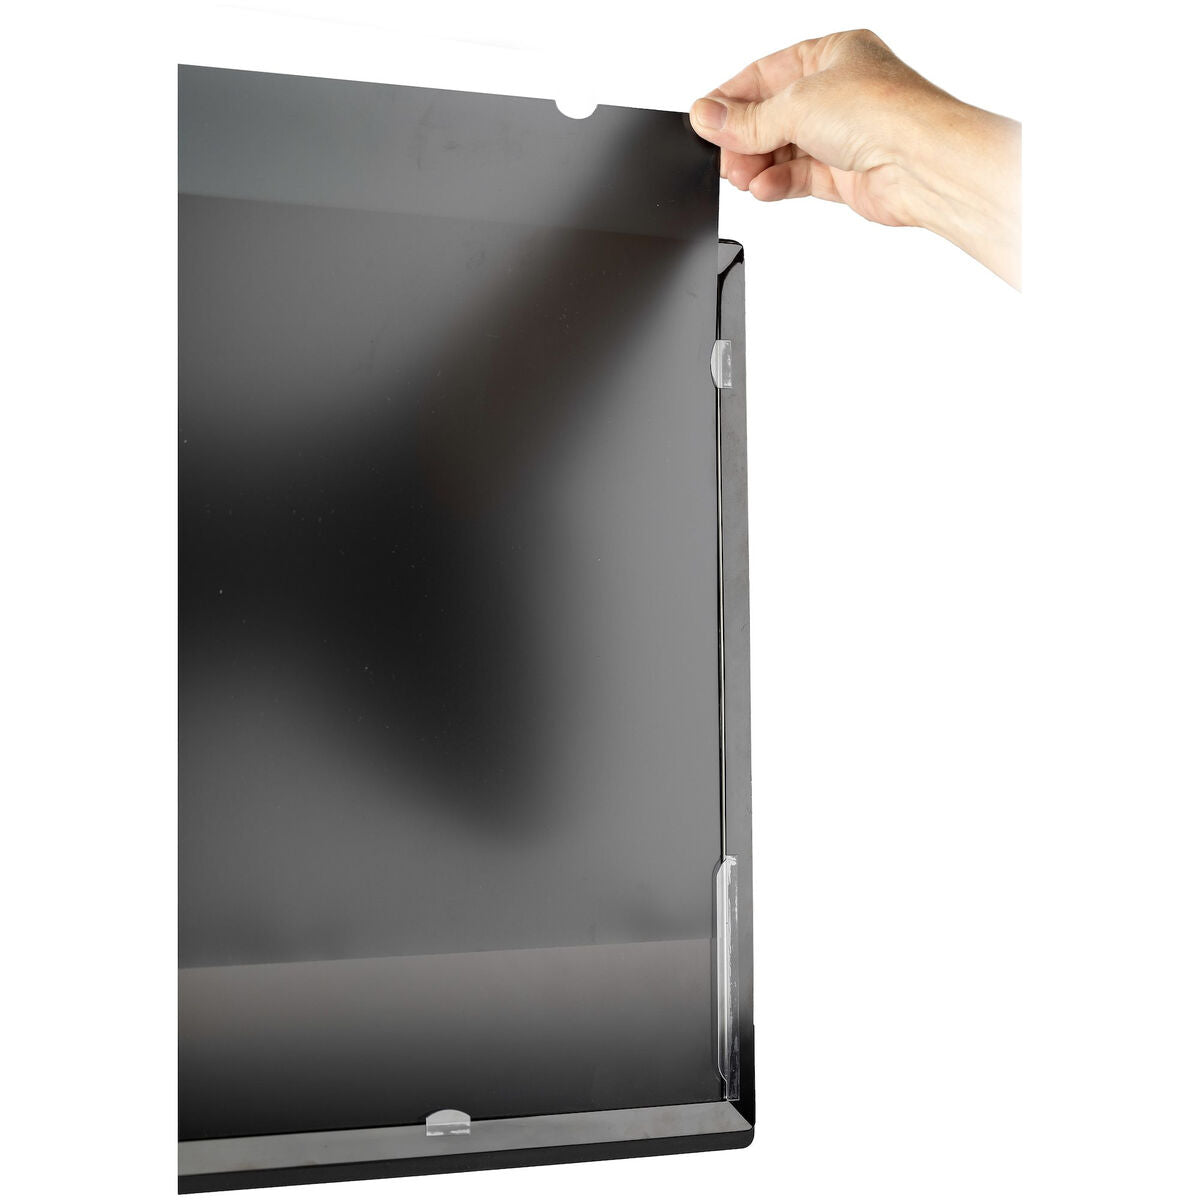 Privacy Filter for Monitor Startech 2269-PRIVACY-SCREEN 22", Startech, Computing, Accessories, privacy-filter-for-monitor-startech-2269-privacy-screen-22, Brand_Startech, category-reference-2609, category-reference-2642, category-reference-2644, category-reference-t-19685, category-reference-t-19908, category-reference-t-21342, computers / peripherals, Condition_NEW, office, Price_50 - 100, Teleworking, RiotNook